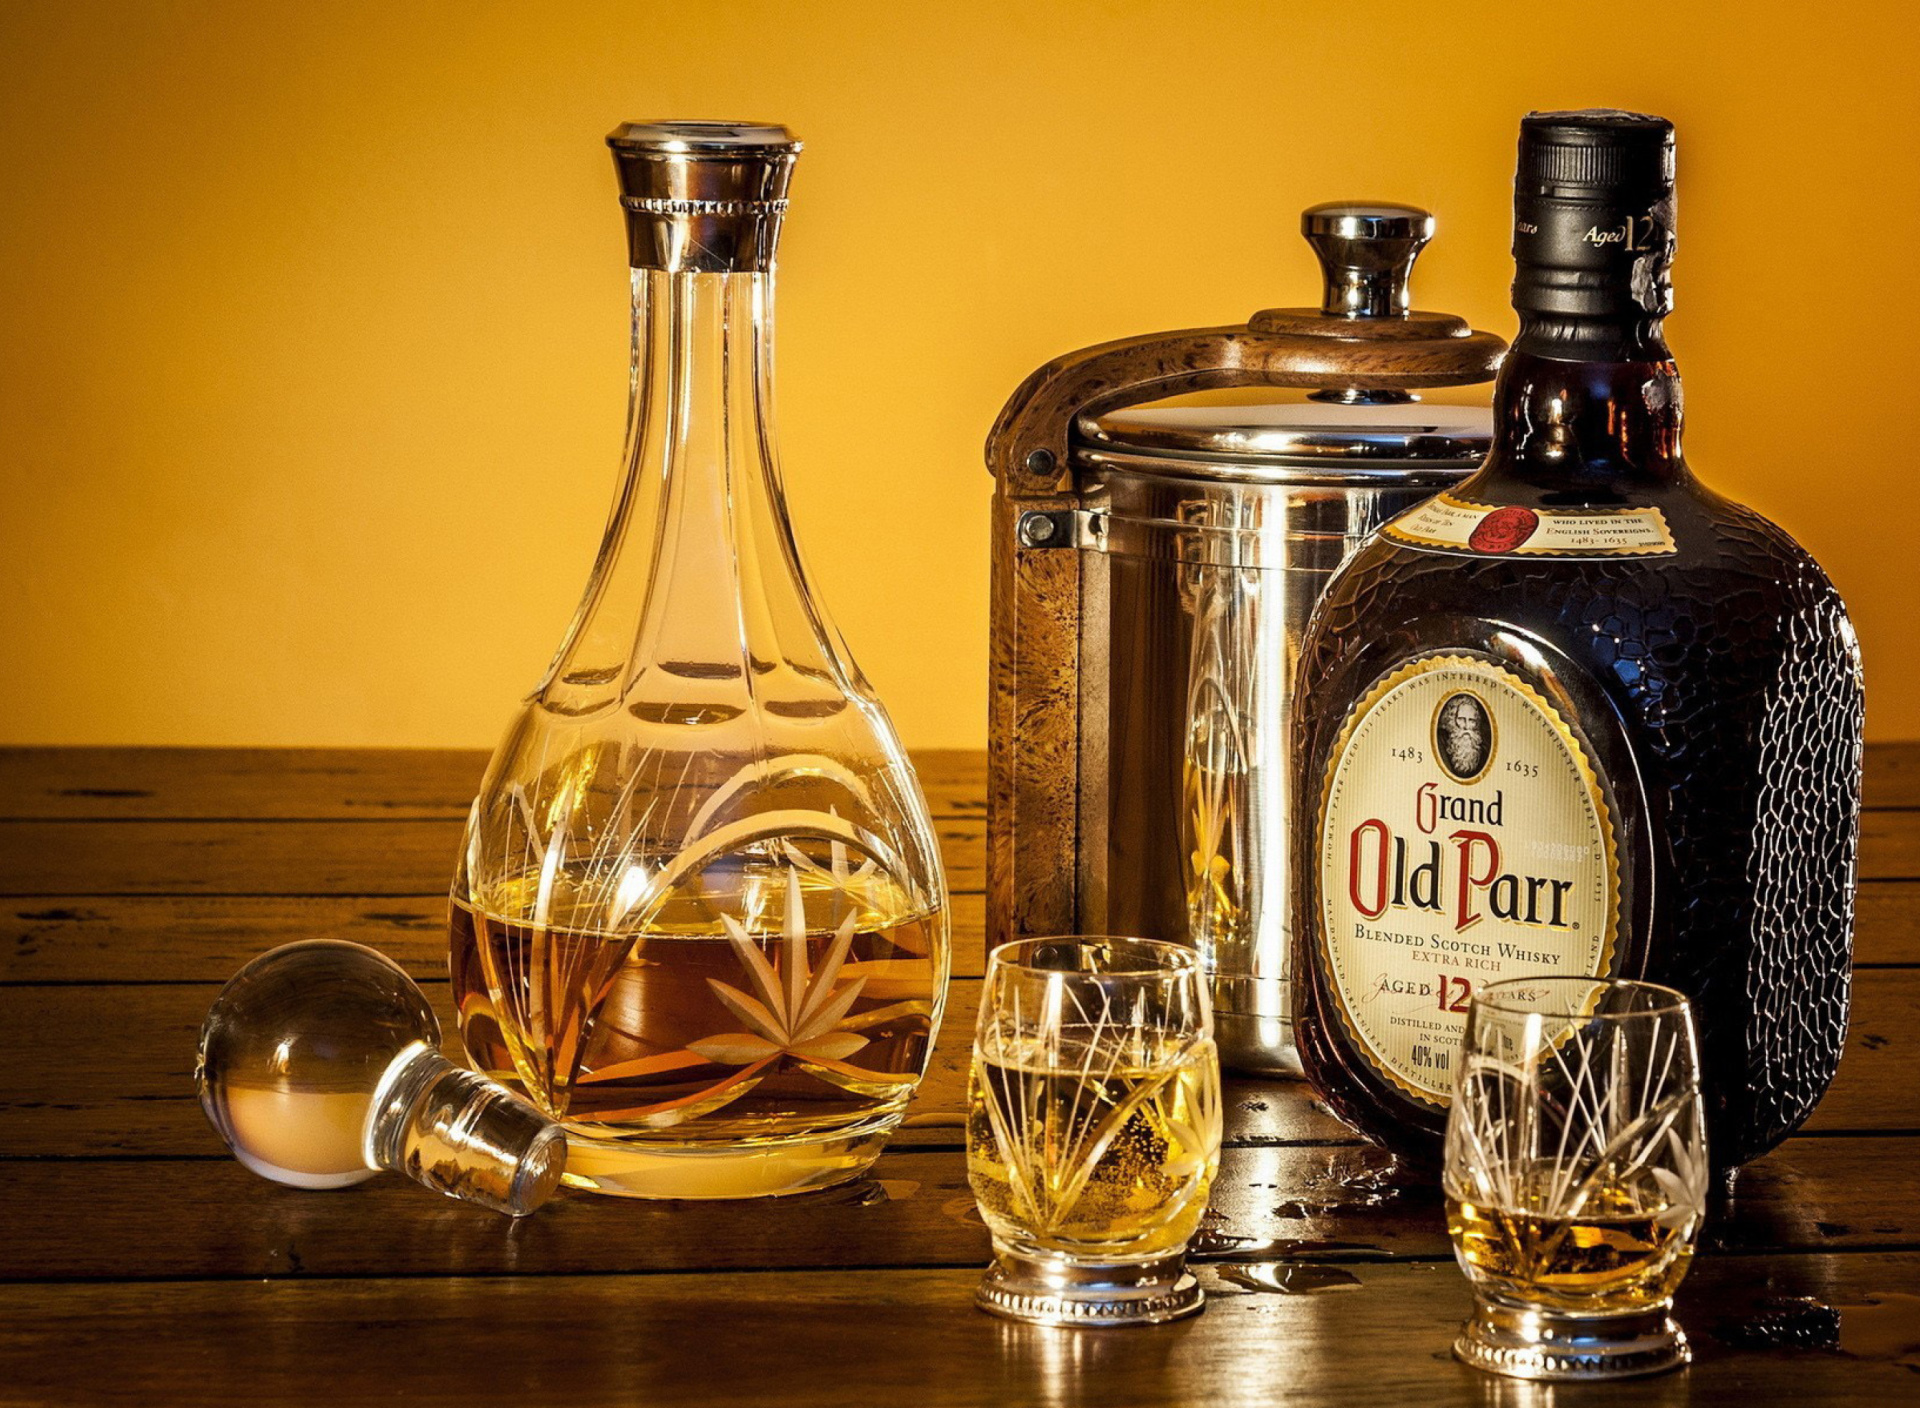 Das Grand Old Parr Blended Scotch Whisky Wallpaper 1920x1408